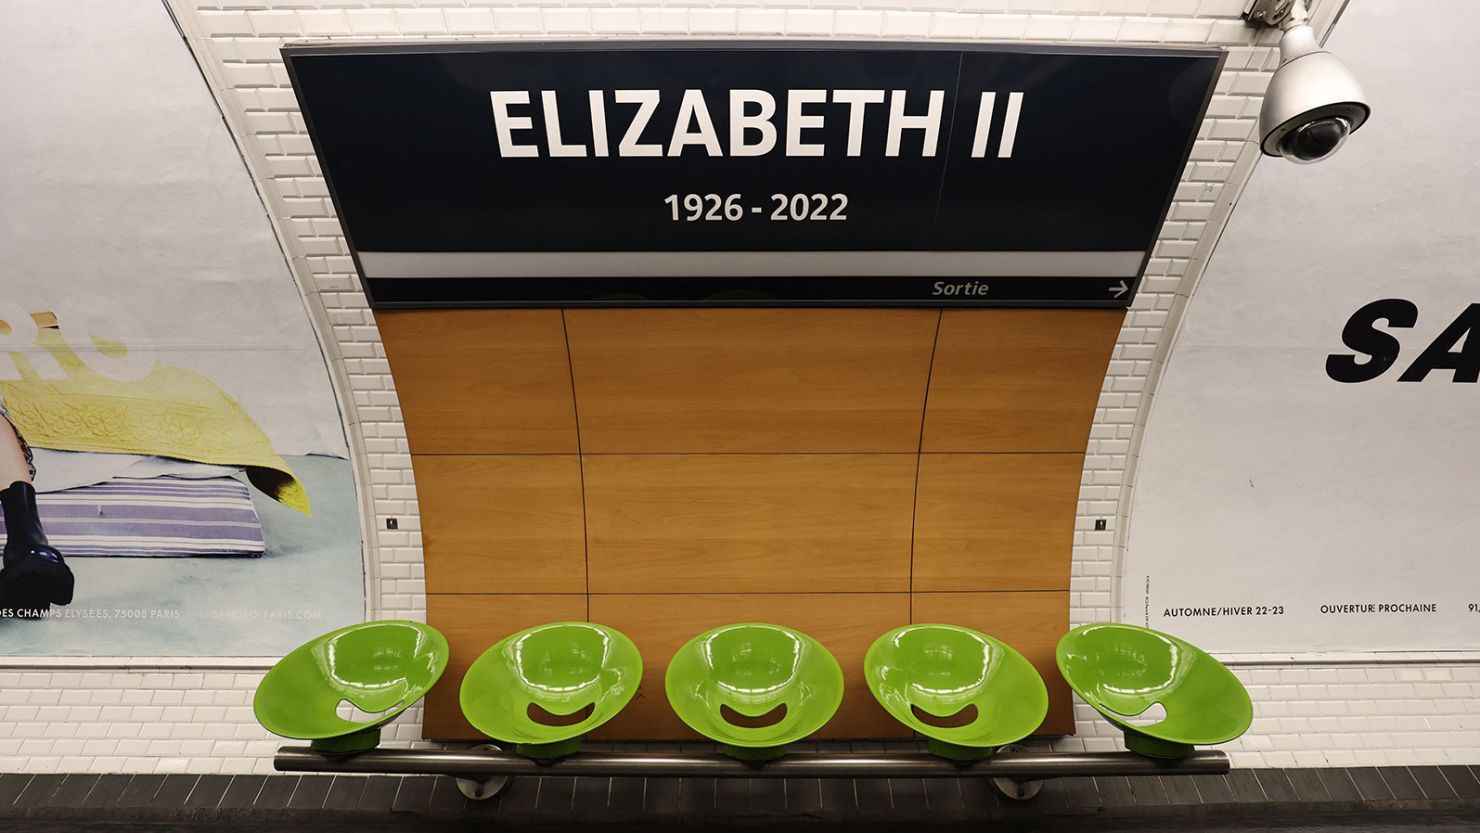 TOPSHOT - A sign in the Parisian underground metro station "George V" is temporarily replaced with a placard reading "Elizabeth II 1926-2022", in the Parisian Metro station George V, in Paris, on September 19, 2022. - Parisian metro operator RATP is temporarily renaming its "George V" metro station to "Elizabeth II" for one day, to coincide with the state funeral of the late queen, on September 19, 2022. (Photo by Thomas SAMSON / AFP) (Photo by THOMAS SAMSON/AFP via Getty Images)